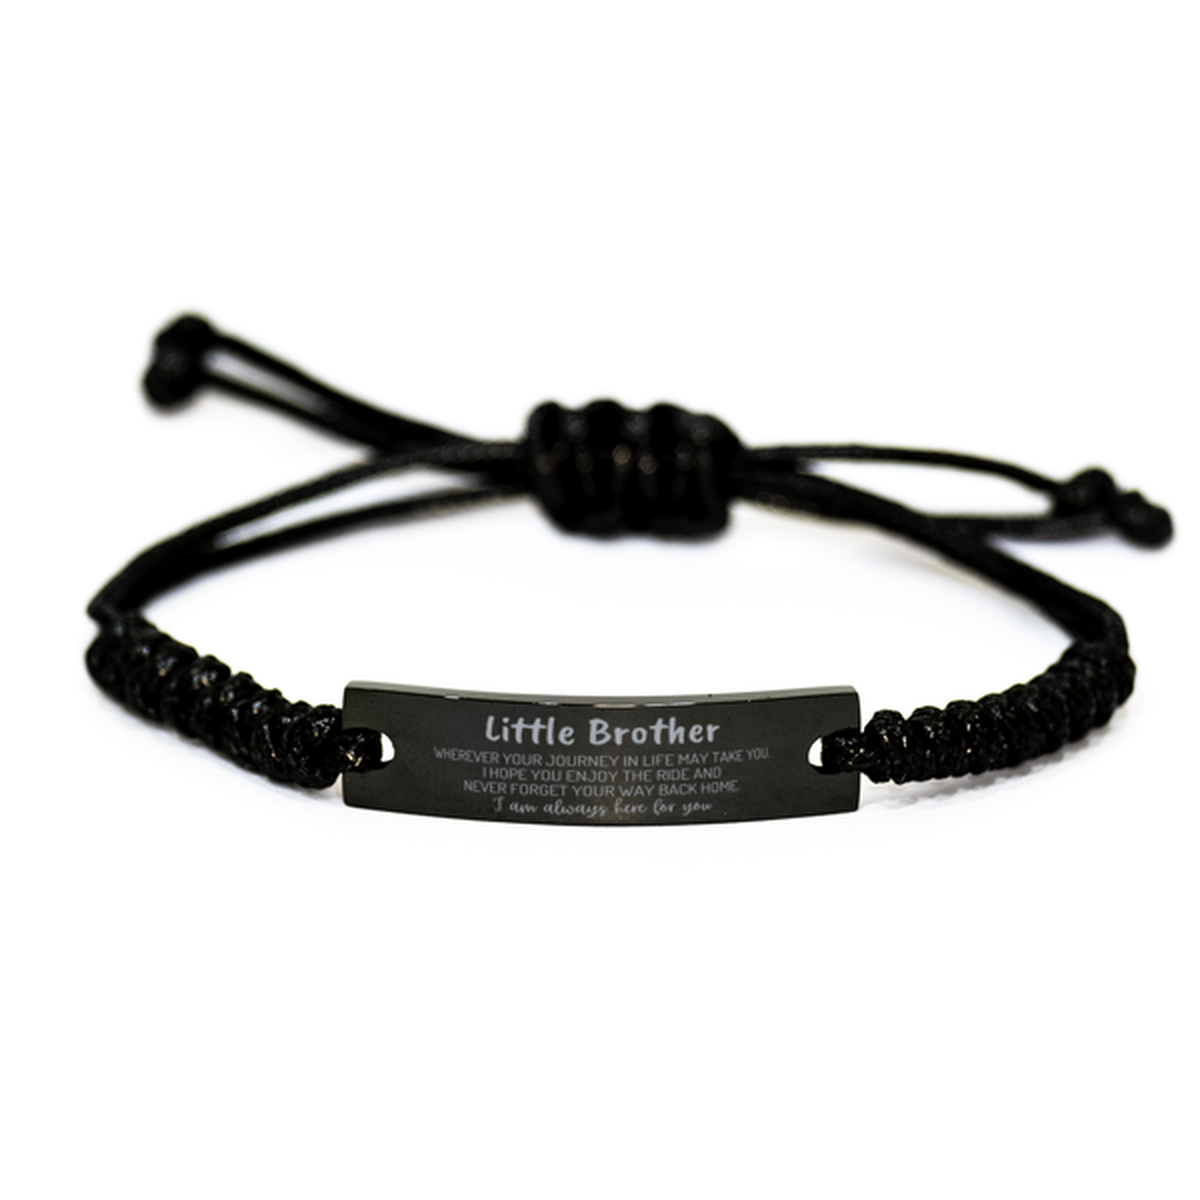 Little Brother wherever your journey in life may take you, I am always here for you Little Brother Black Rope Bracelet, Awesome Christmas Gifts For Little Brother, Little Brother Birthday Gifts for Men Women Family Loved One